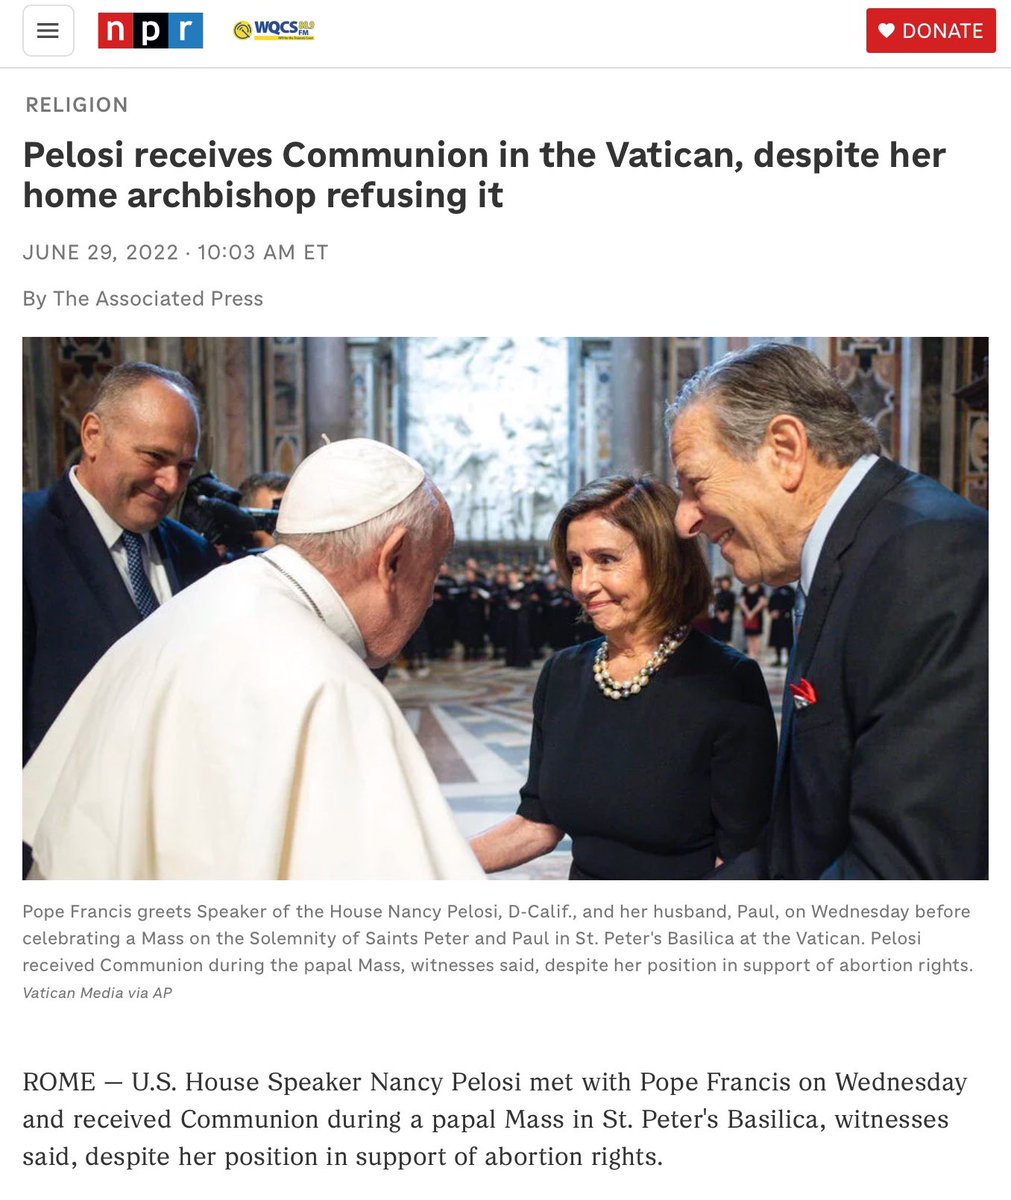 @Scott479 “After numerous attempts to speak with her to help her understand the grave evil she is perpetrating, the scandal she is causing, and the danger to her own soul she is risking, I have determined that … she is not to be admitted to Holy Communion,” Archbishop Cordileone said.